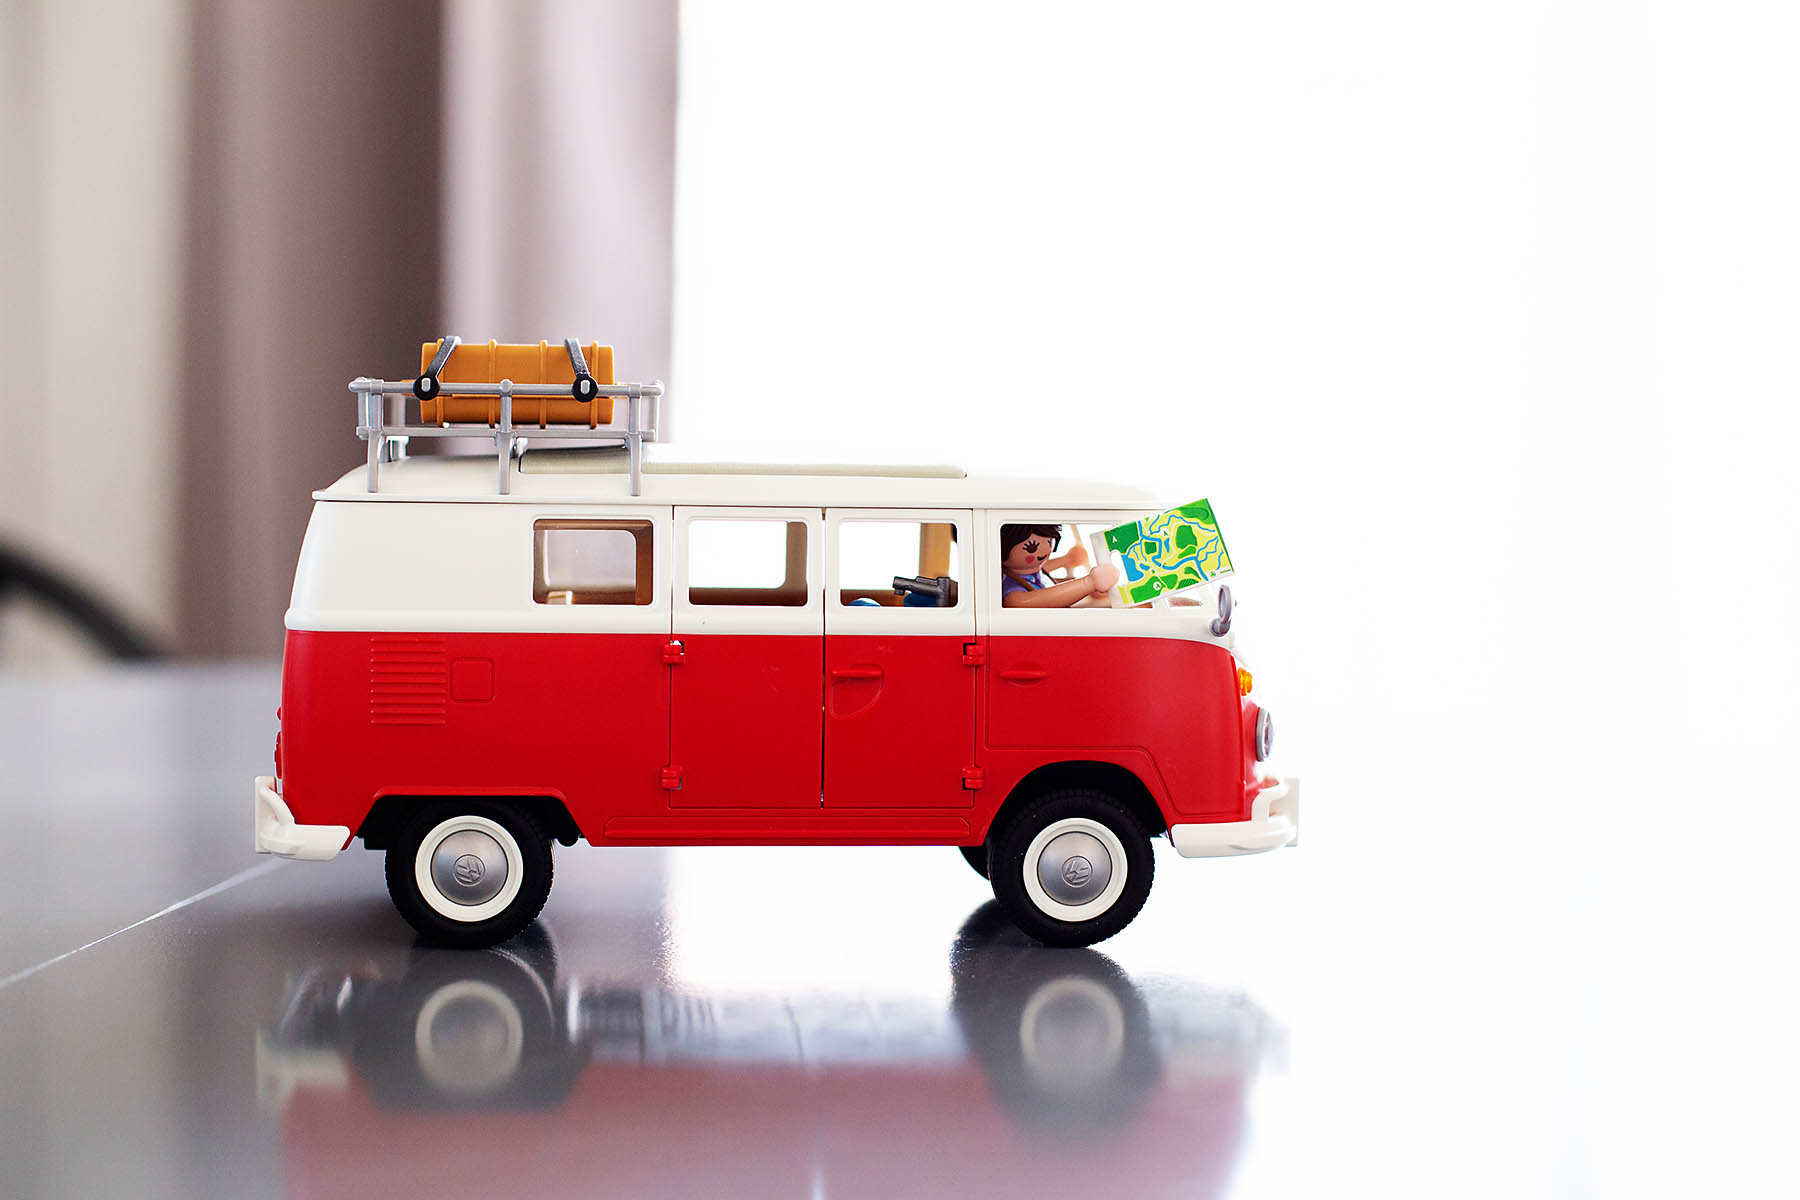 New Volkswagen Beetle and T1 Camping Bus PLAYMOBIL playsets